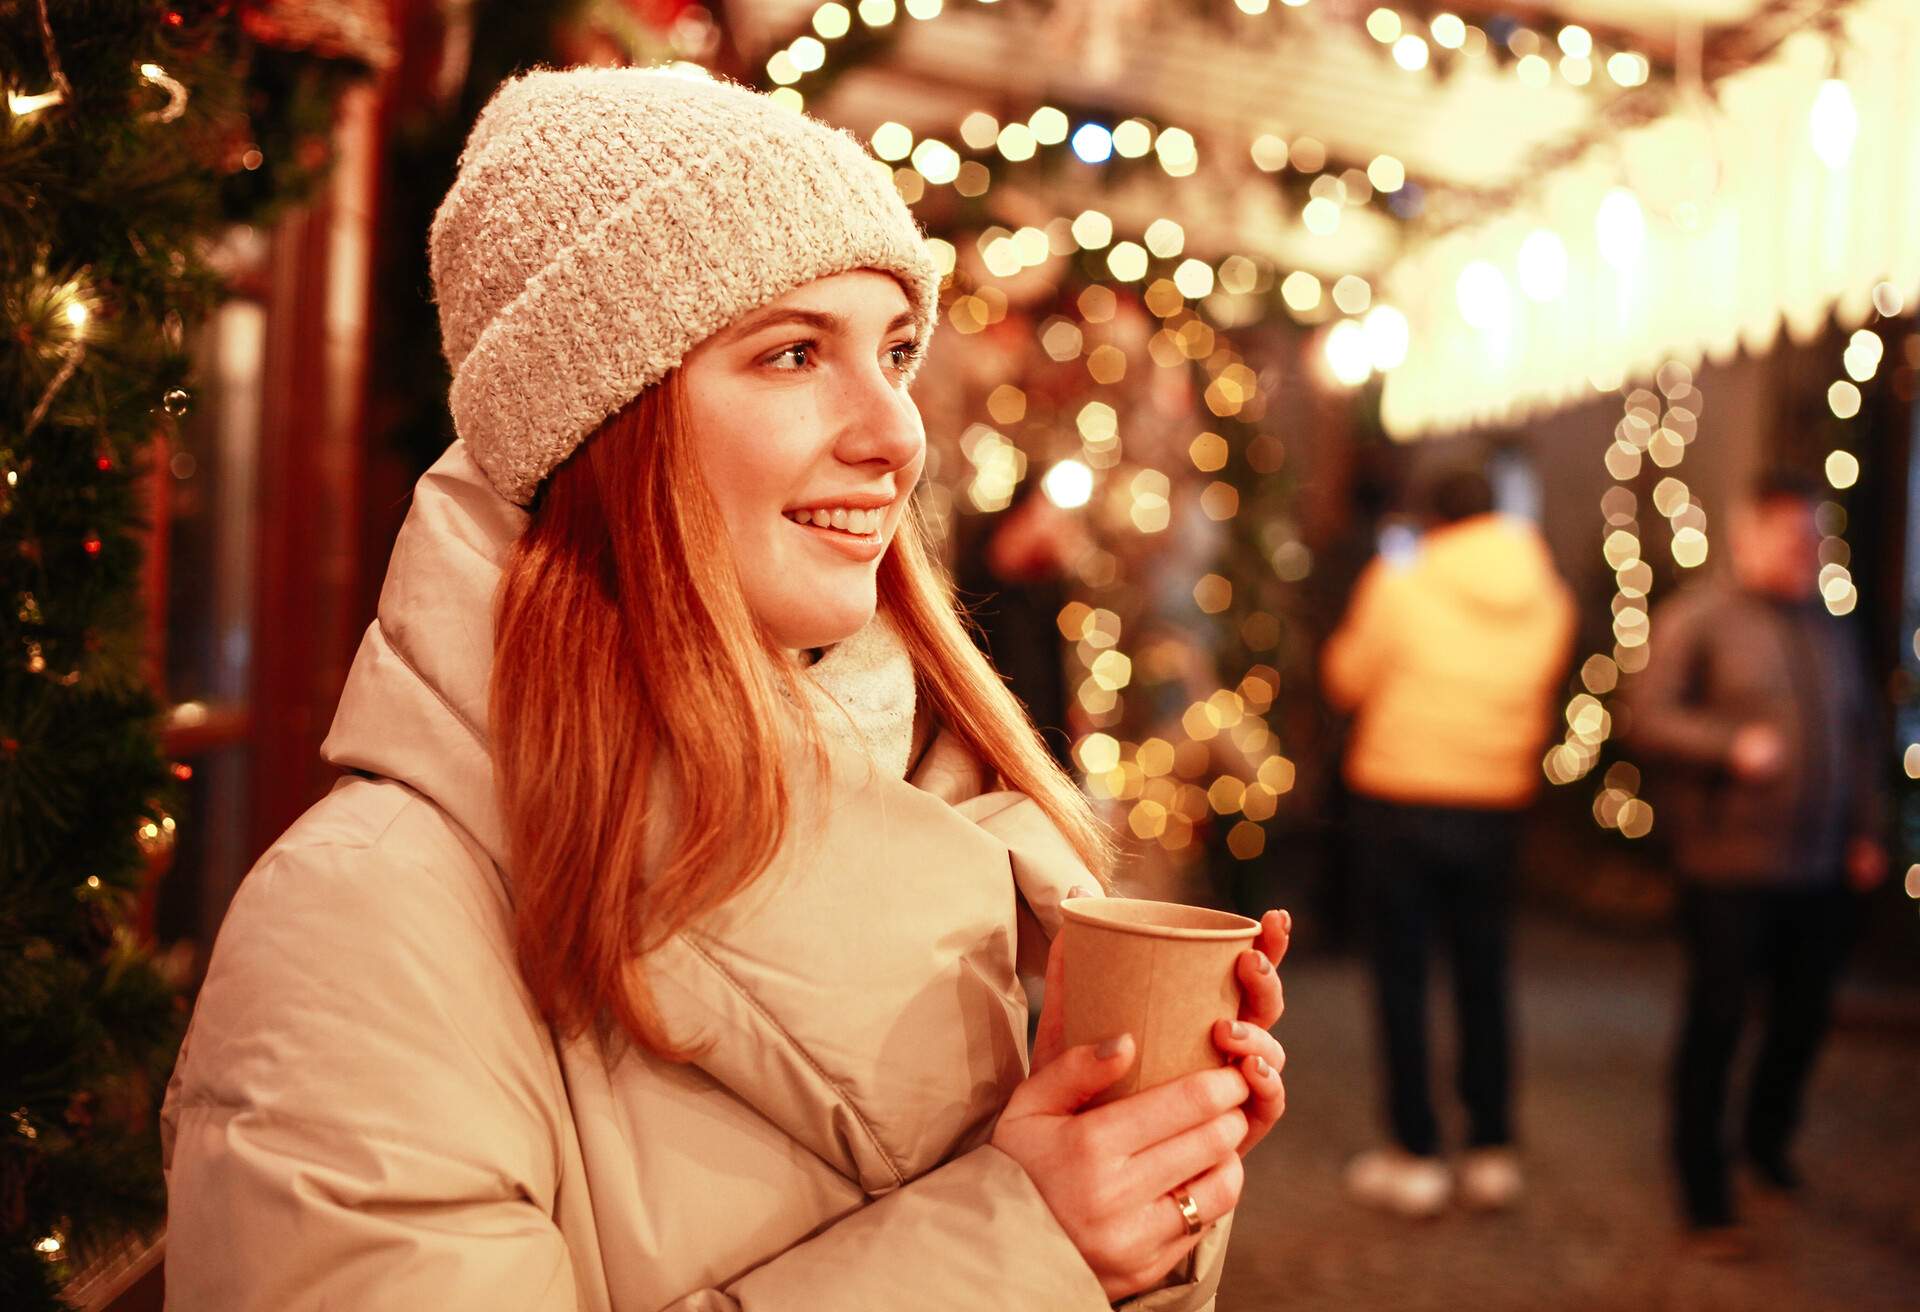 Happy young woman at Christmas market in the winter time. Christmas lights and tree decorations on street. Holidays concept.